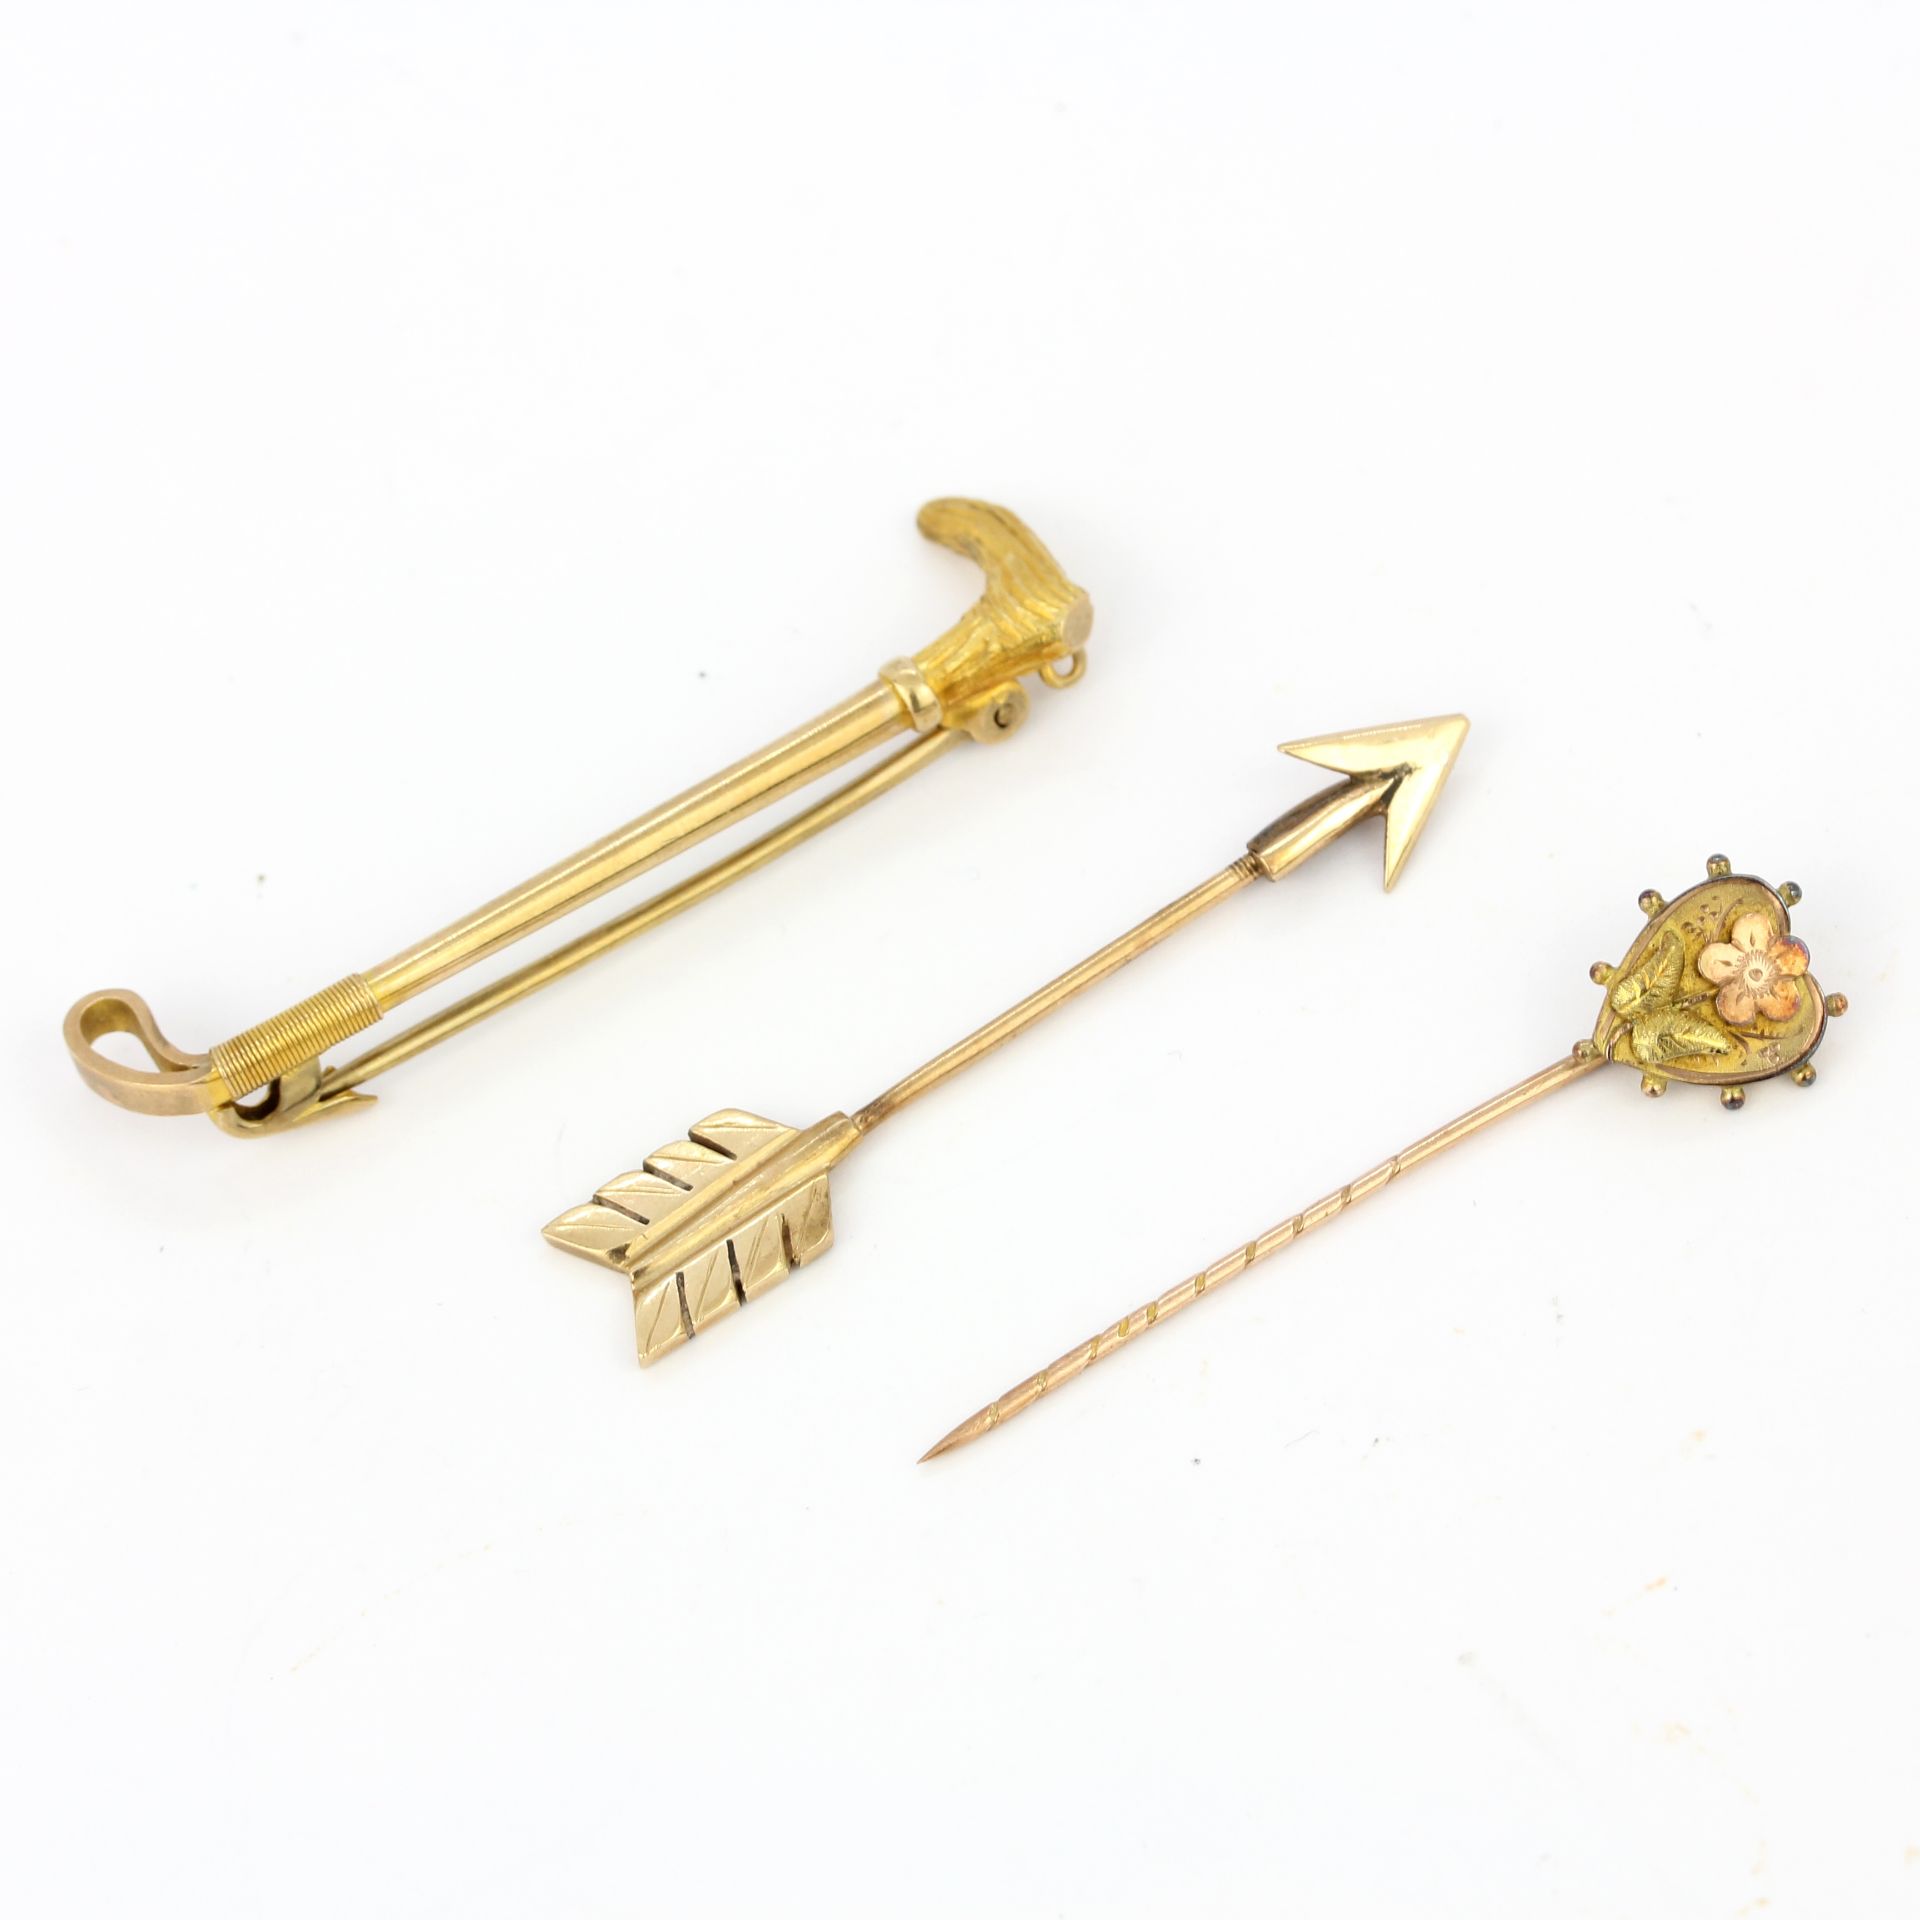 A 9ct yellow gold brooch together with two 9ct gold tie pins, L. 4.5 and 4cm.